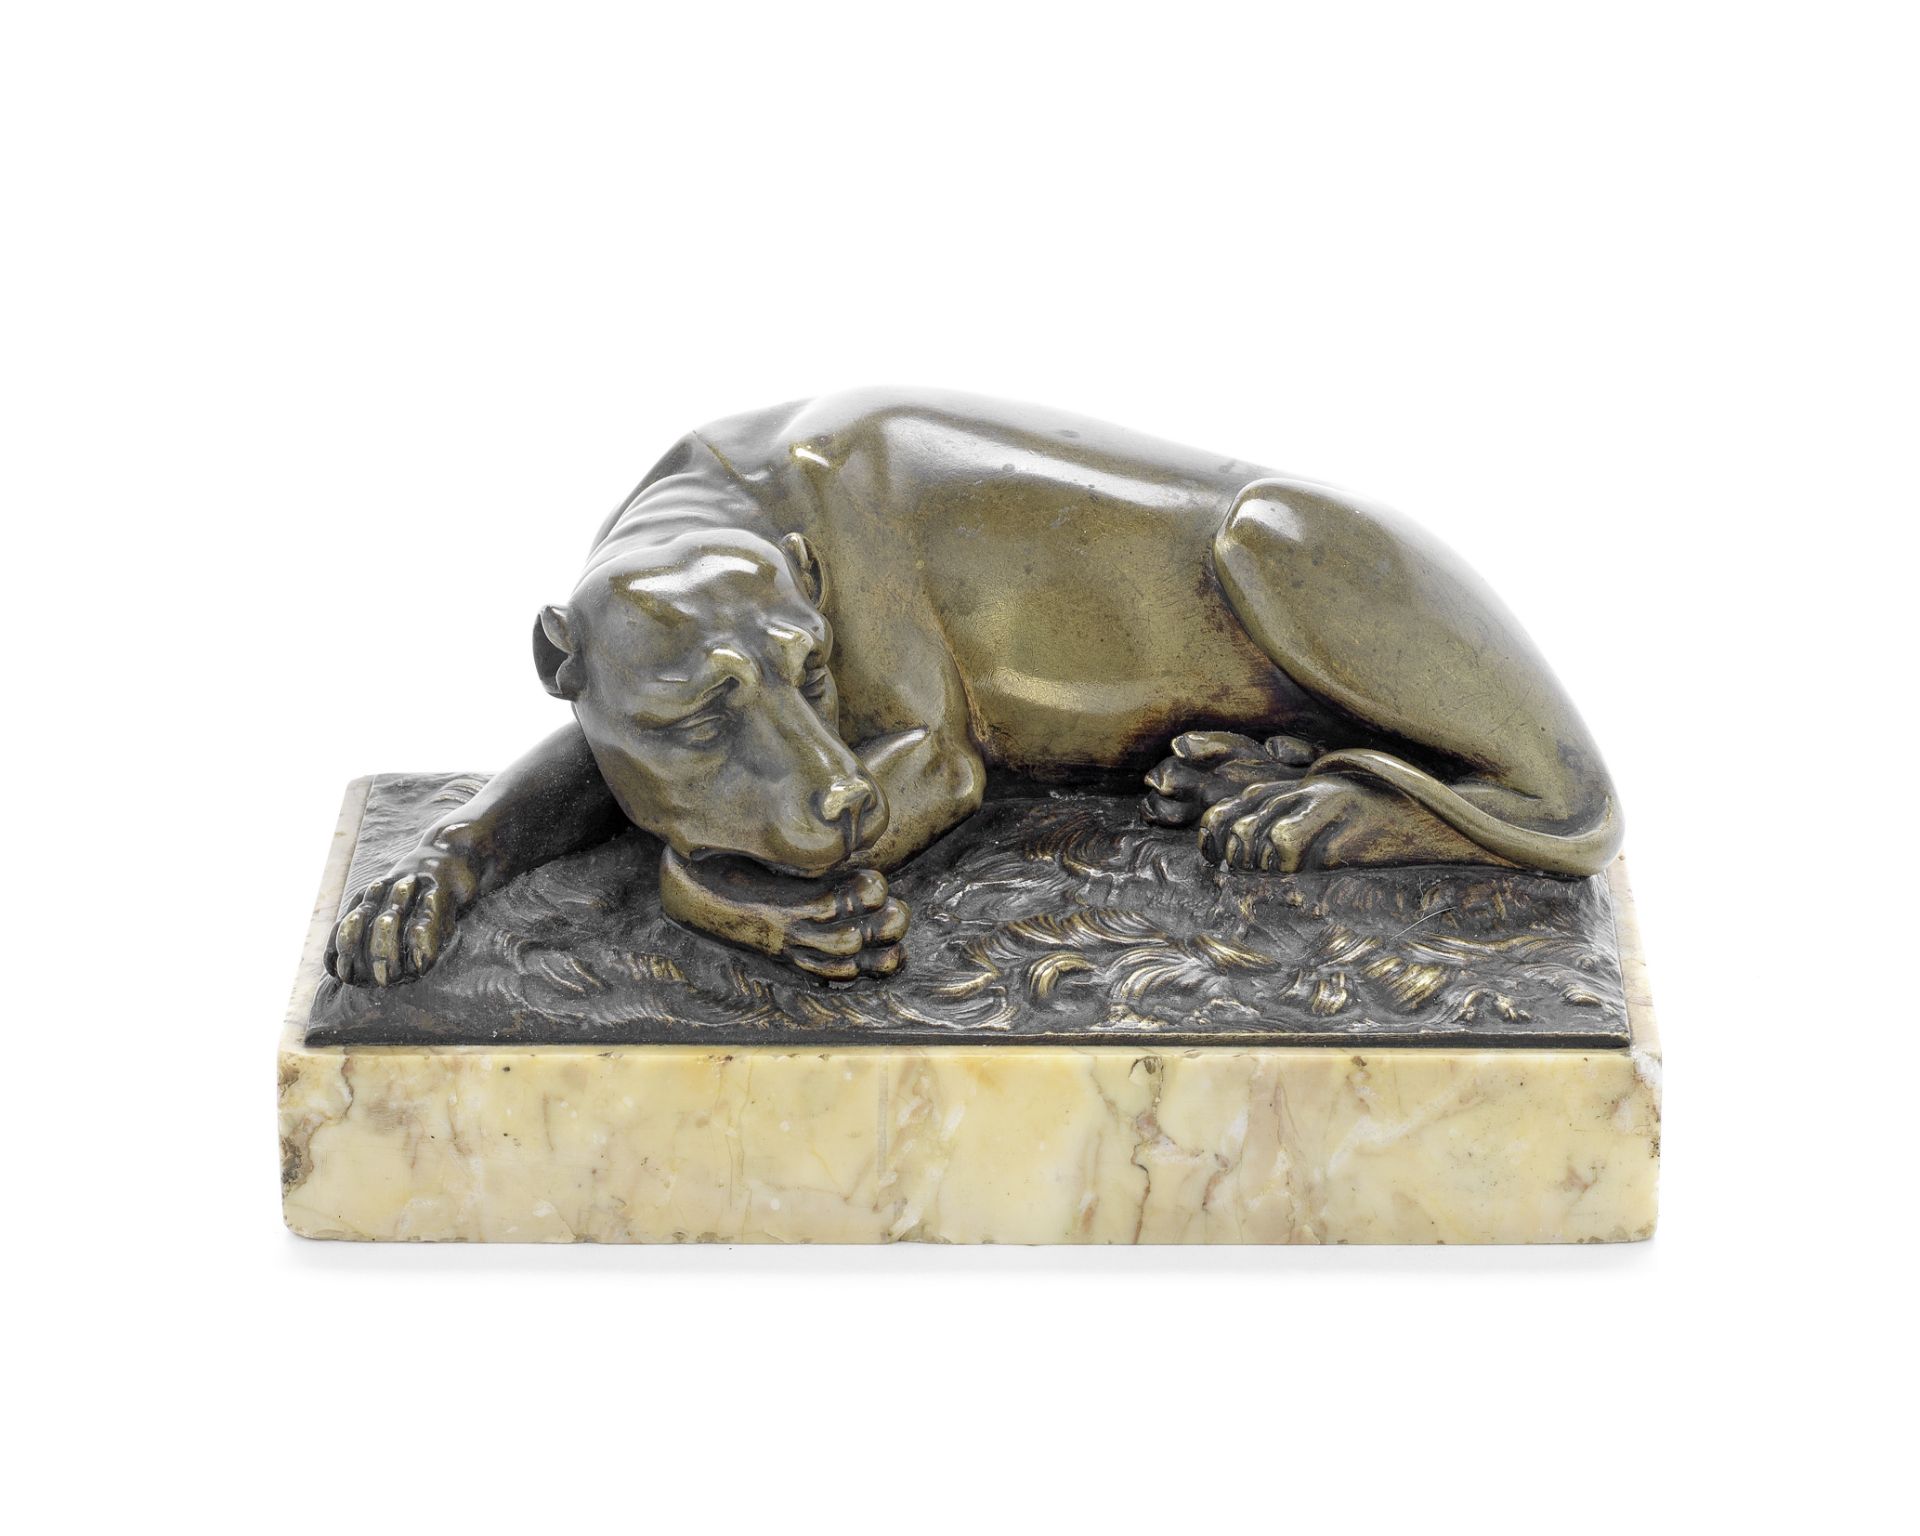 A mid 19th century 'Grand Tour' type patinated bronze and marble model of a recumbent hound